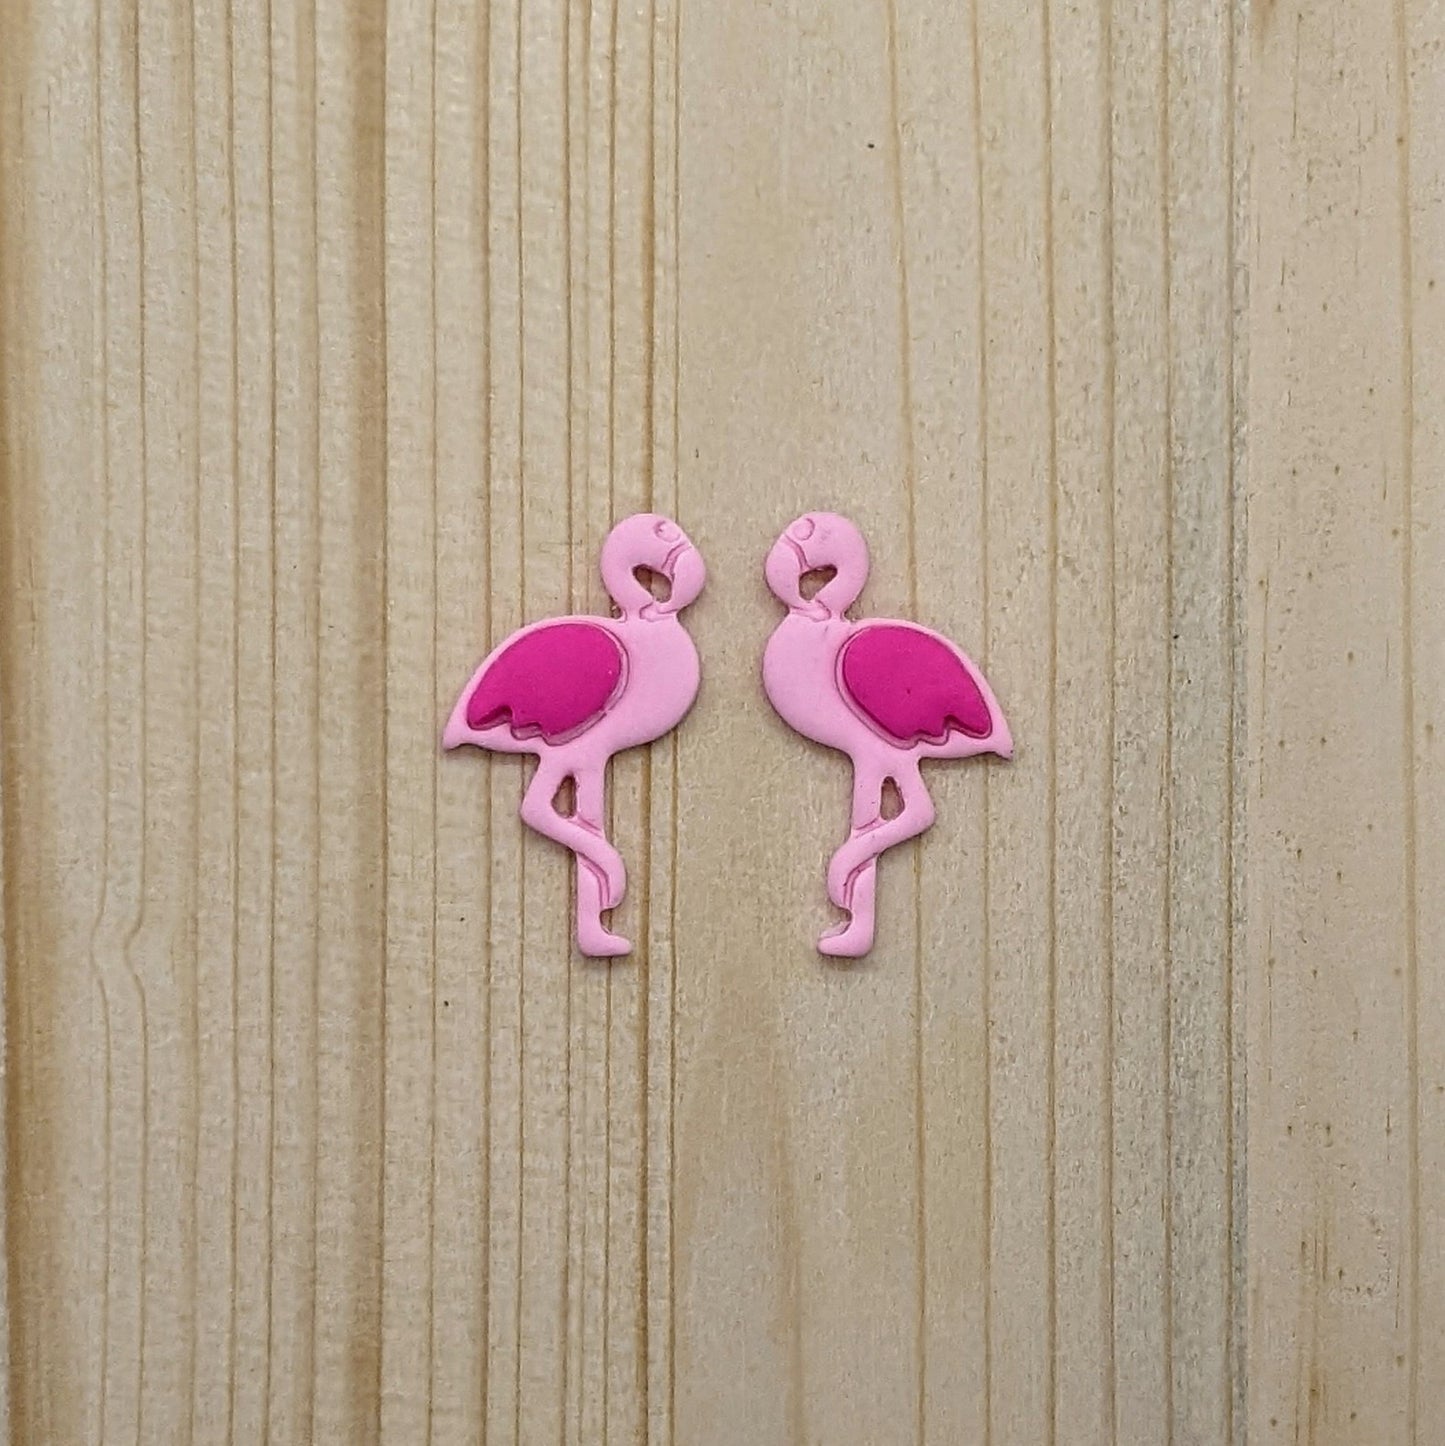 Flamingo and Wing 2 Piece Cutter Set for Cookies, Ceramics, Pottery, Polymer Clay, Fondant - Multi-Medium Craft & Baking Tool